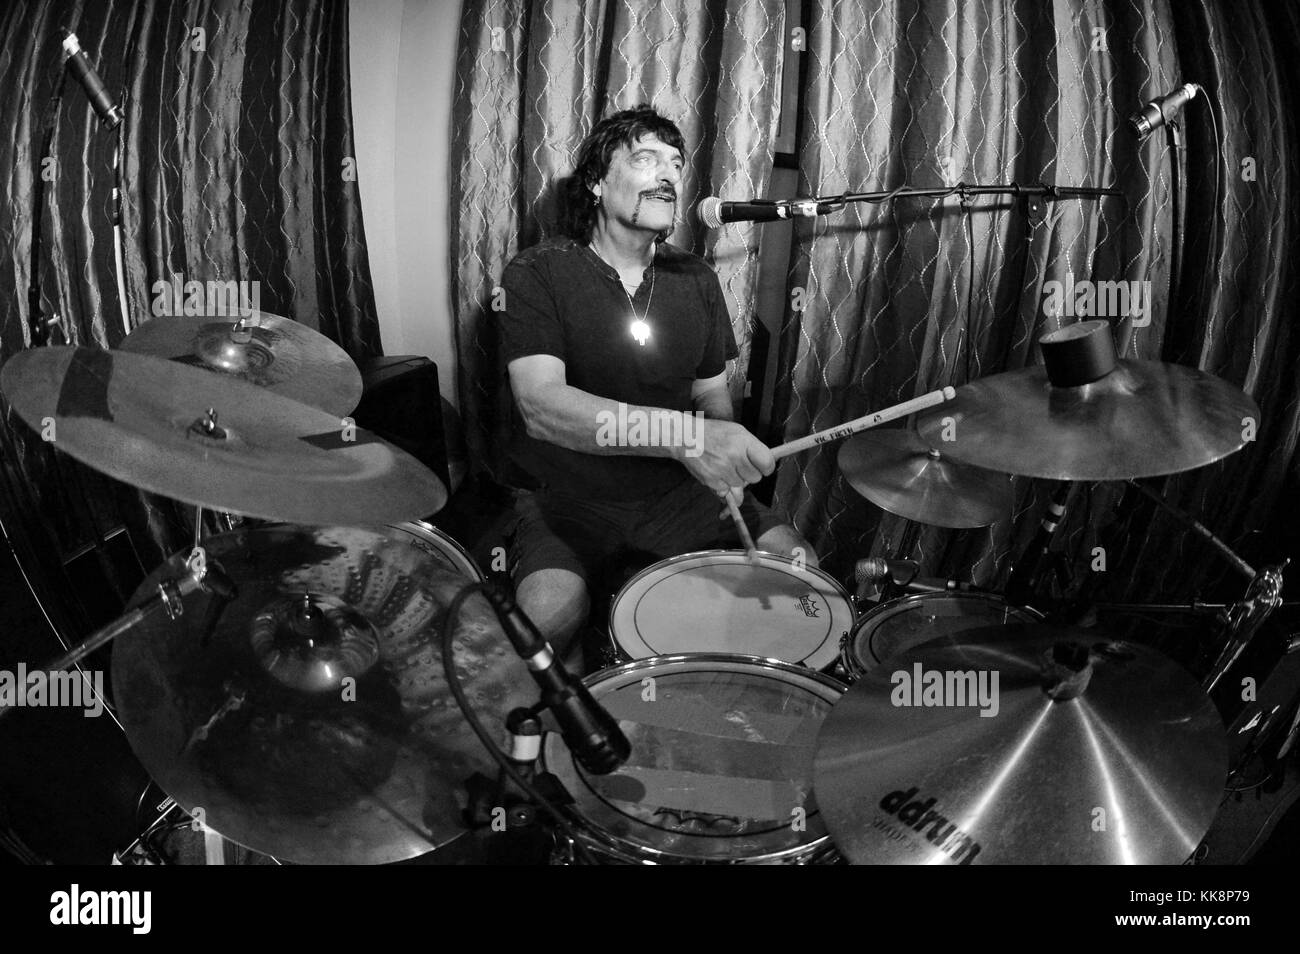 FORT LAUDERDALE, FL - MARCH 04: Carmine Appice and Steve Price perform at Rips Sports Bar and Grill. Carmine Appice is an American drummer and percussionist most commonly associated with the rock genre of music. Steve Price has played with such legendary musicians as Greg Allman, Dom um Ramao, Les Paul, Ray Gillan, Carmine Appice, Mike Portnoy, Ian Lloyd, Paul Morris, and Micheal Brecker on March 4, 2016 in Fort Lauderdale, Florida   People:  Carmine Appice Stock Photo